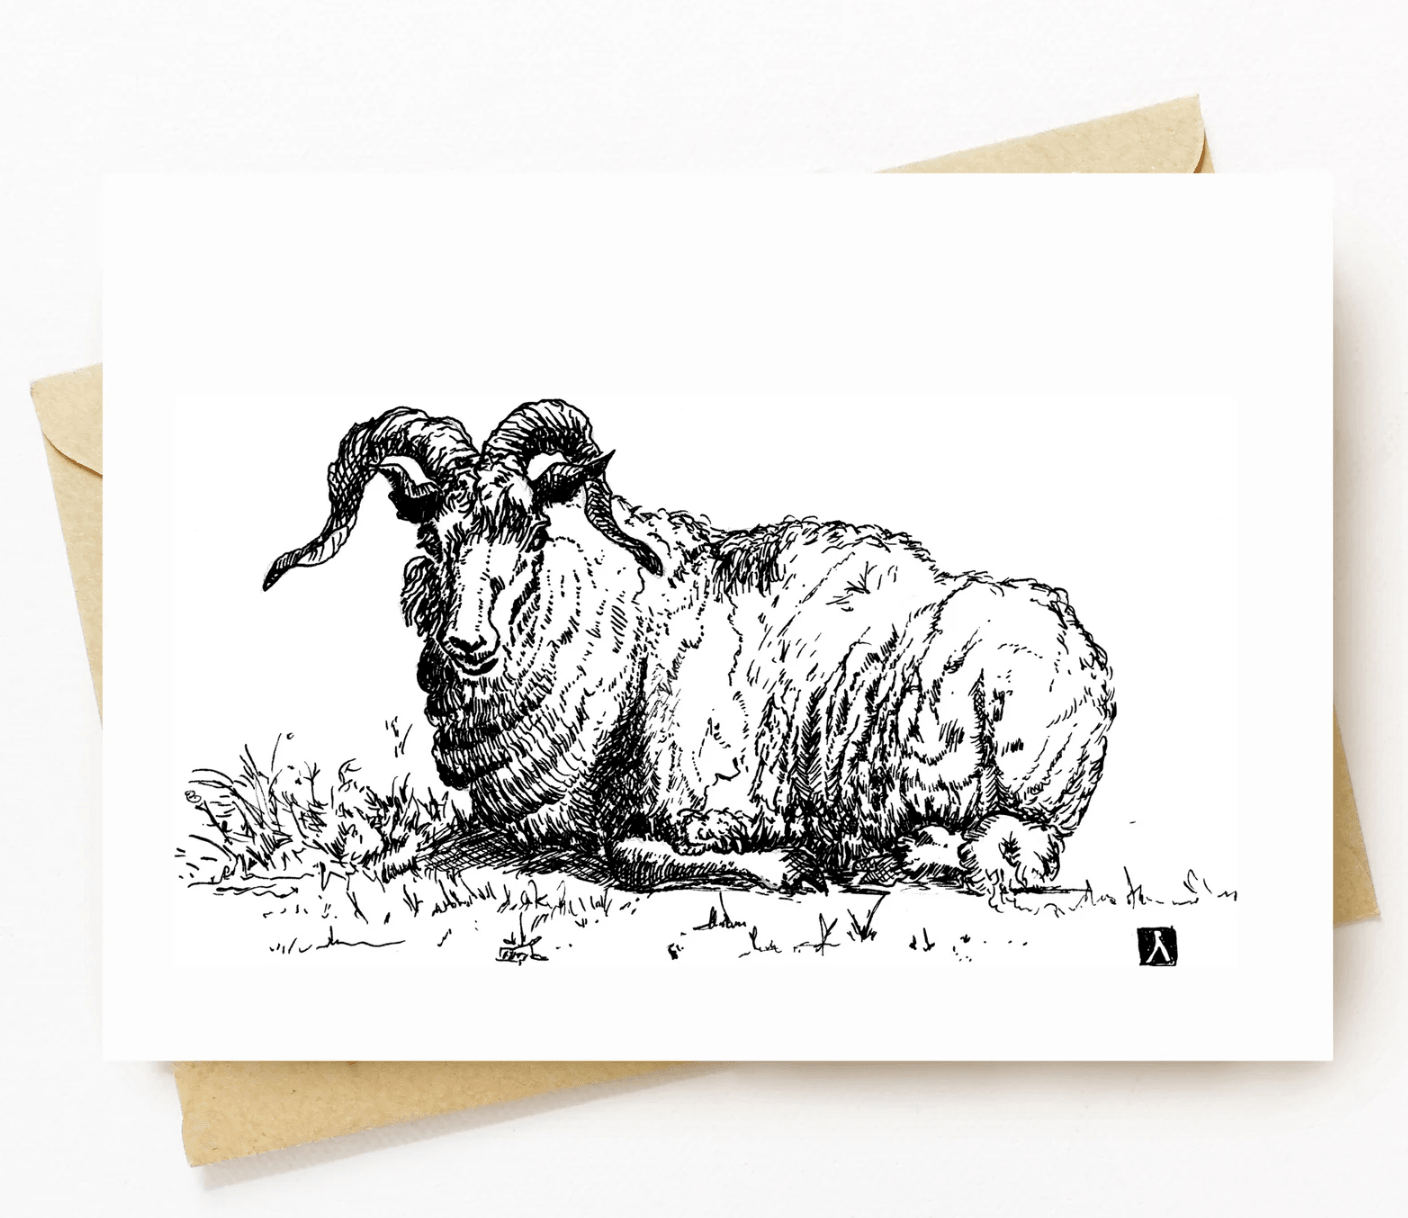 BellavanceInk: Greeting Card With A Pen & Ink Drawing Of A Laying Ram 5 x 7 Inches - BellavanceInk